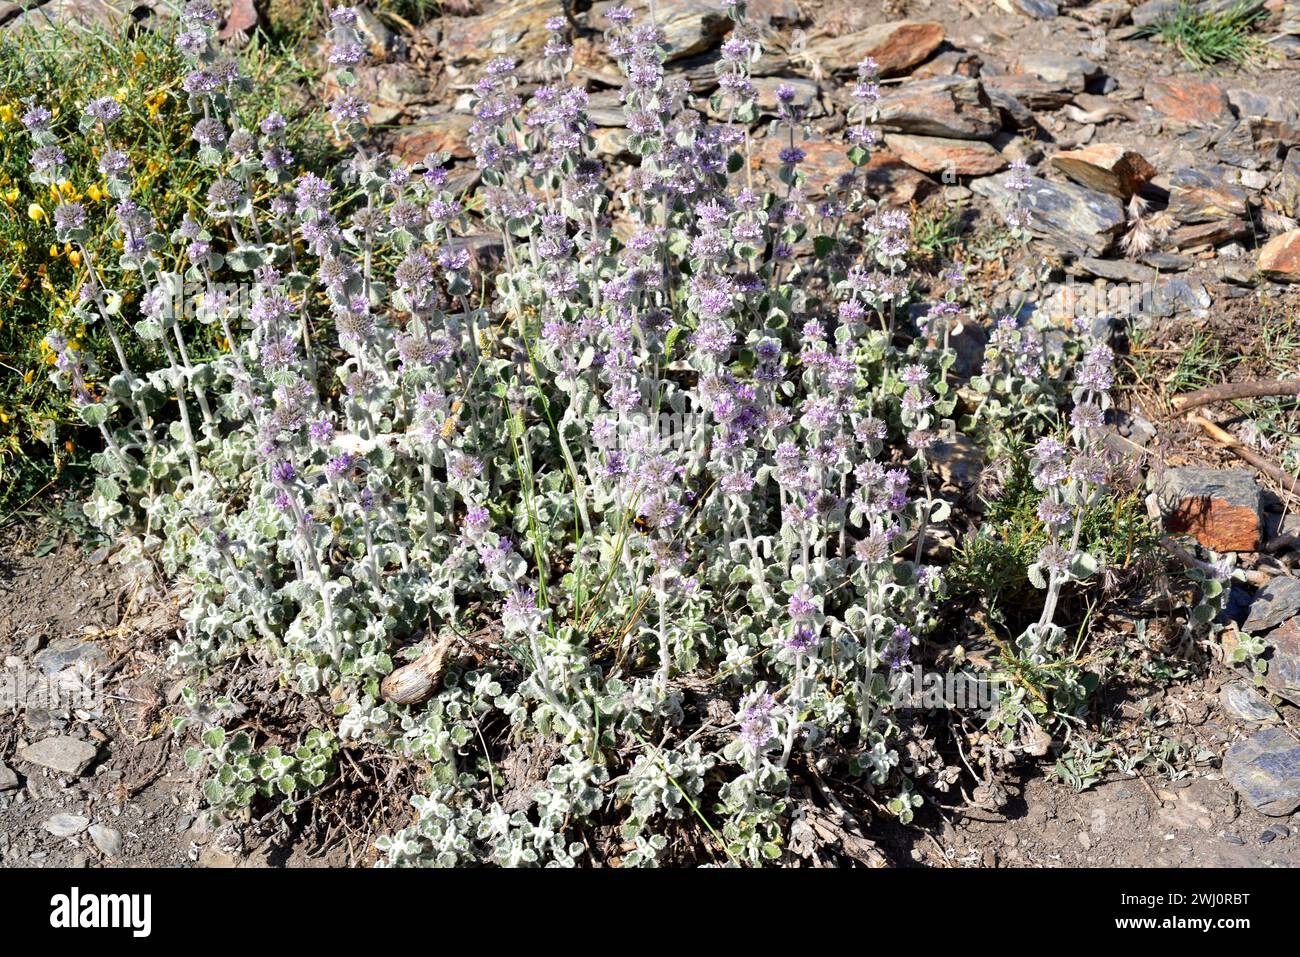 Marrubio nevado (Marrubium supinum) is a perennial herb endemic to eastern Spain and north western Africa. This photo was taken in Sierra Nevada Natio Stock Photo